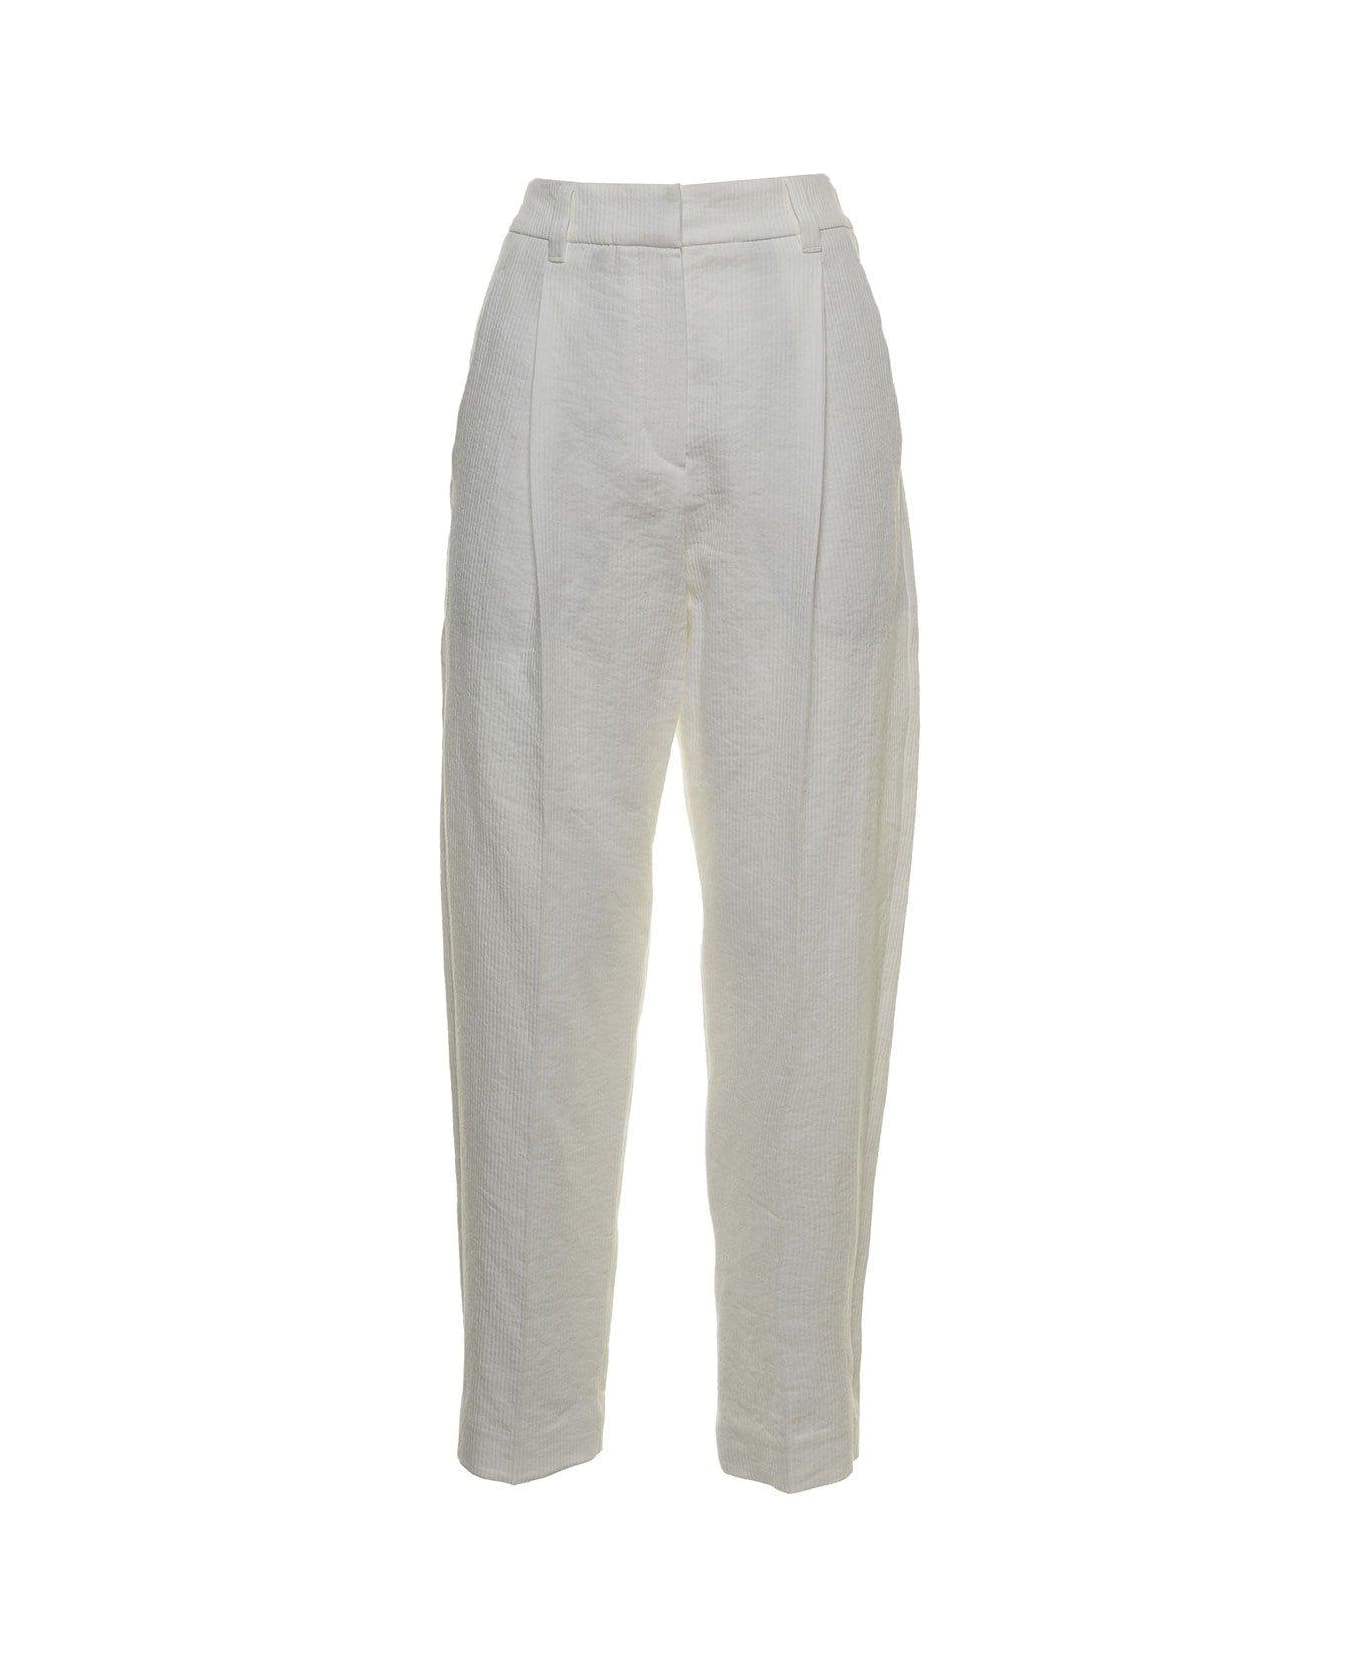 Brunello Cucinelli Pleat Detailed Tapered Pants - White